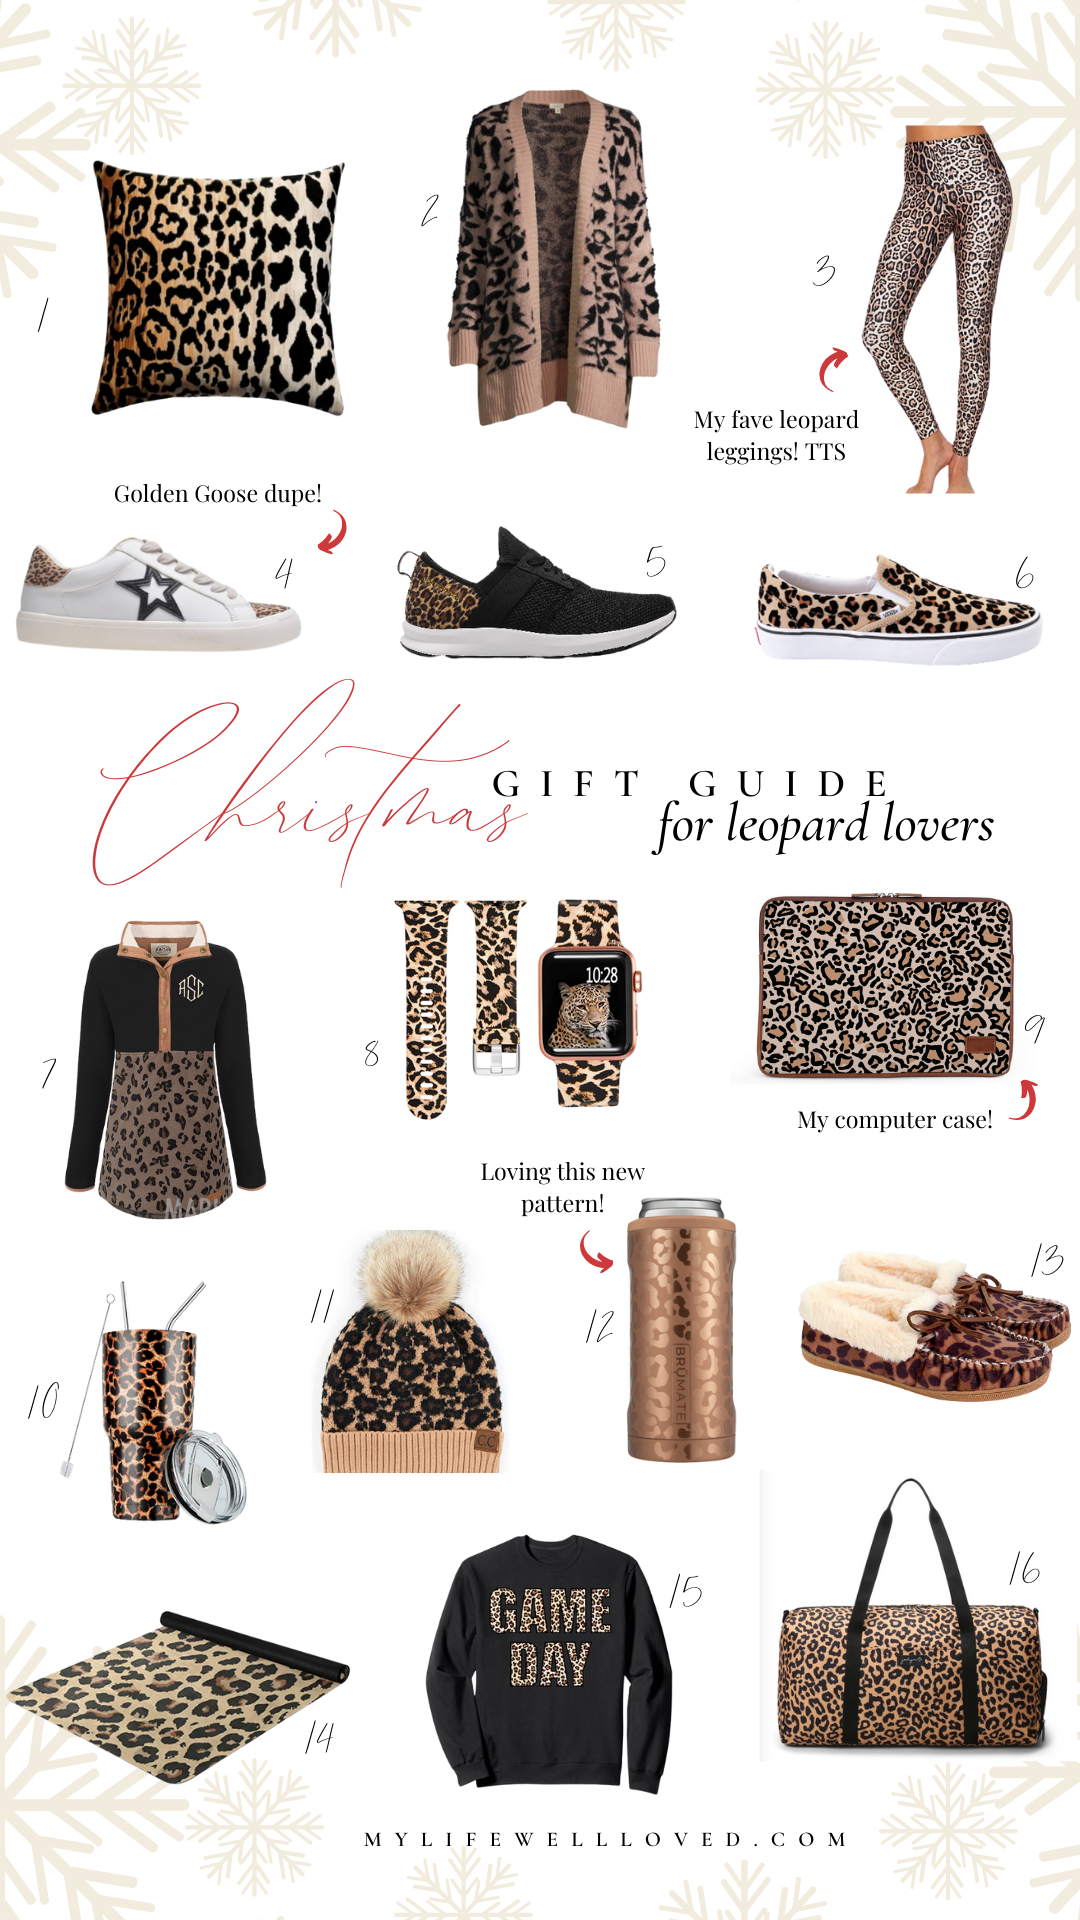 Style + fashion blogger, My Life Well Loved, shares Holiday Shopping: 16 Stylish Leopard Print Gifts for Ladies! Click here to check it out!